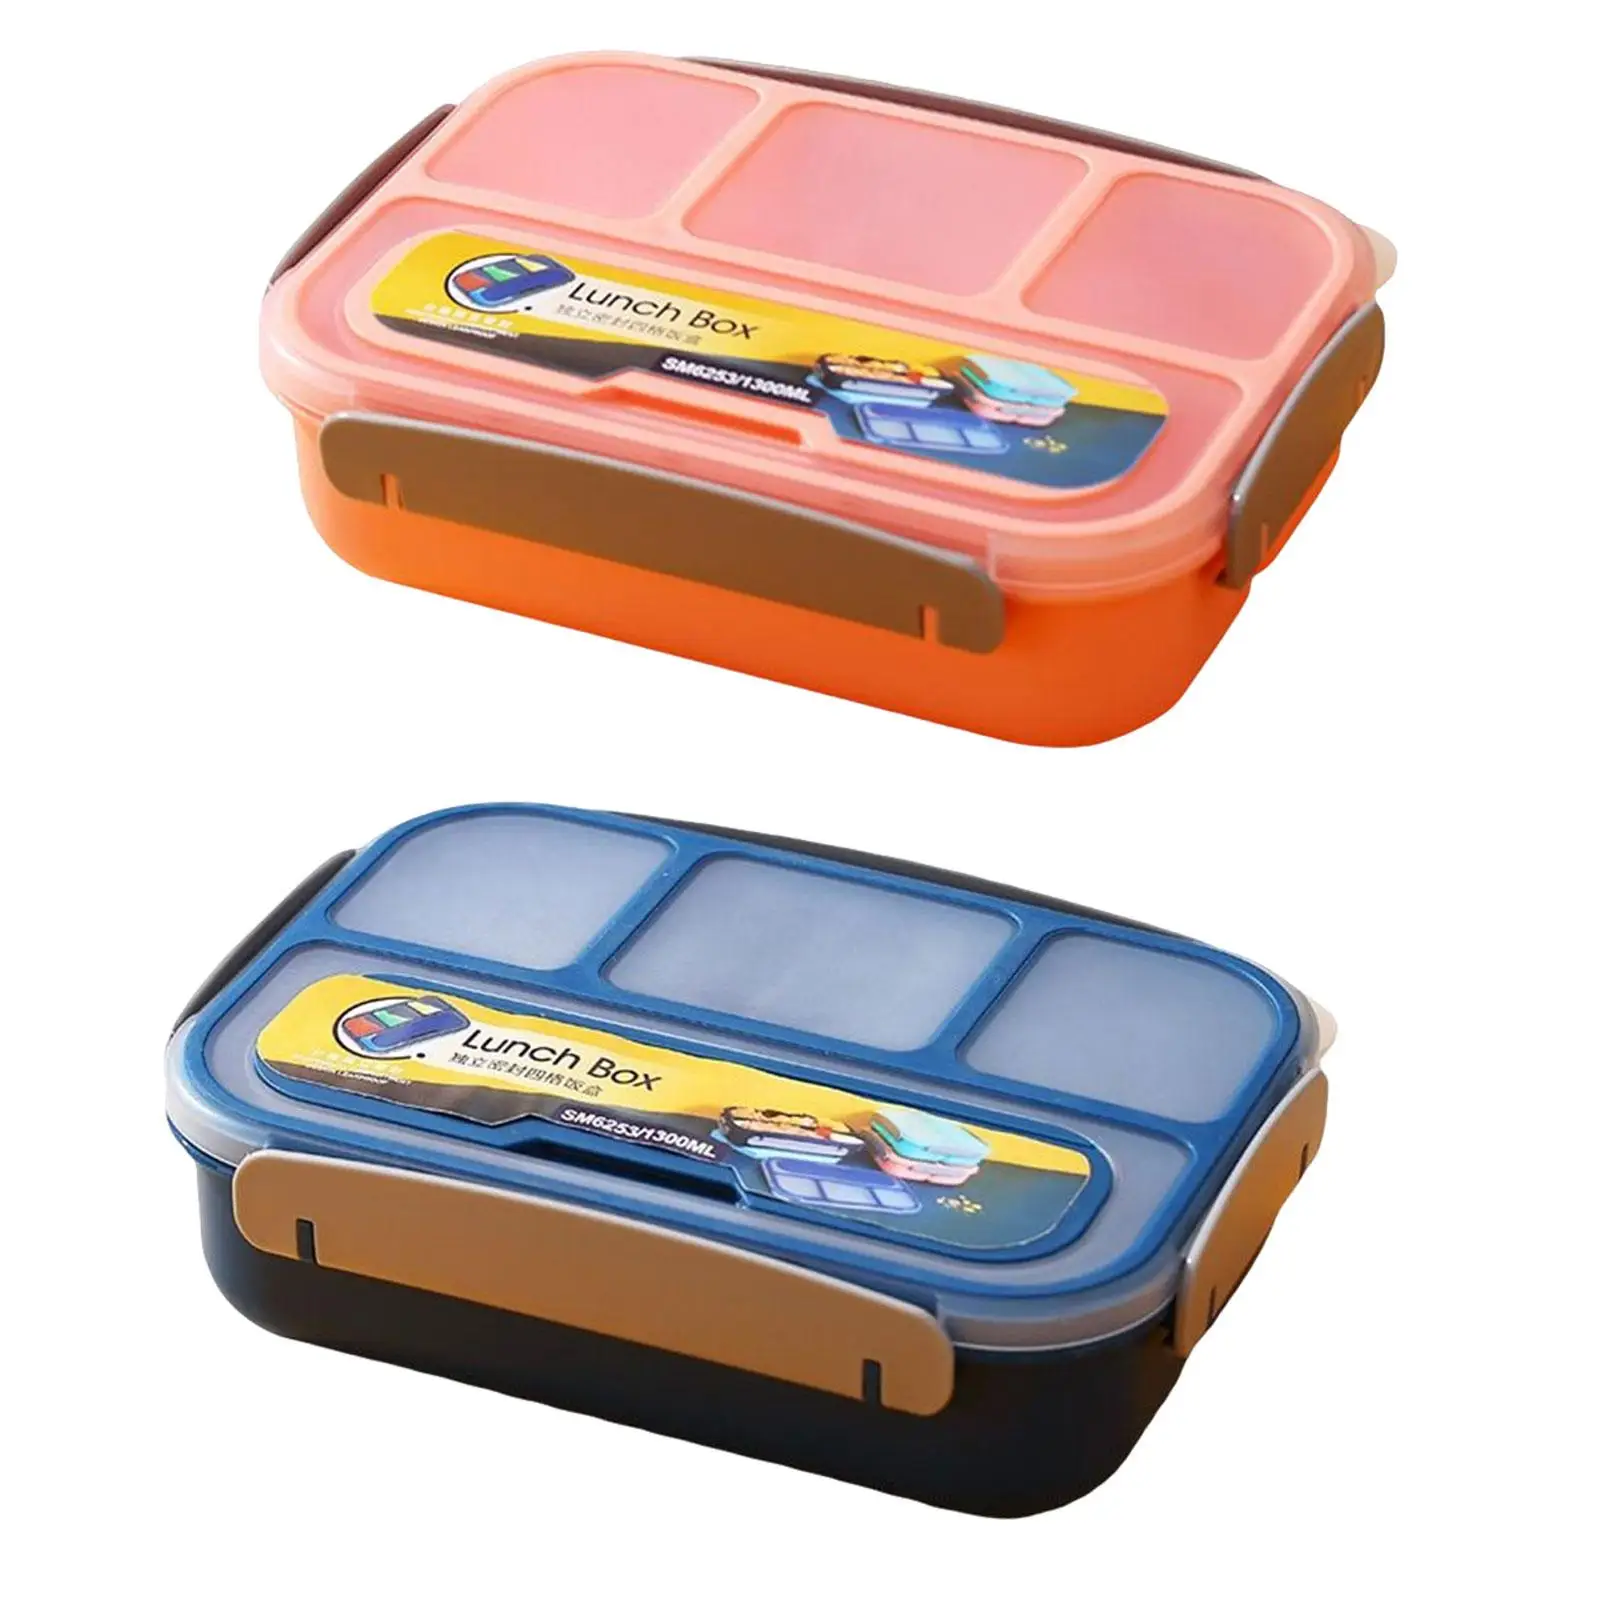 Portable Lunch Box Container, Food Storage Container, Bento Lunch Box for Picnic Travel Camping Home Office